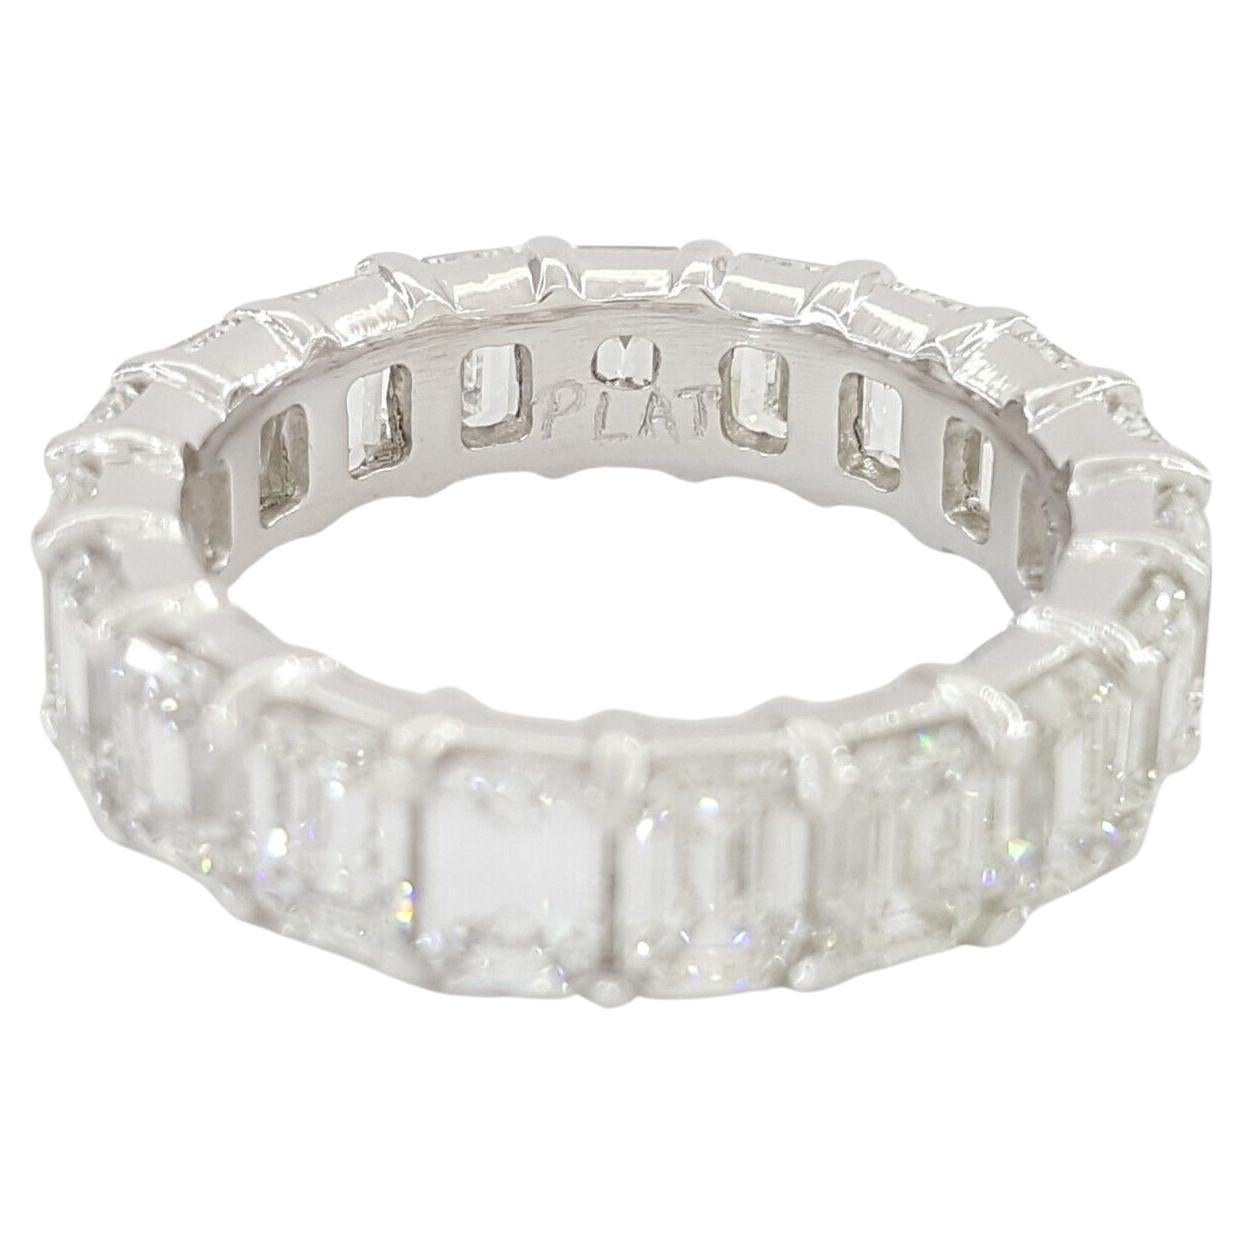 Introducing our stunning Platinum Emerald Cut Diamond Full Circle Eternity Band, a symbol of eternal love and timeless elegance. Crafted by our skilled in-house jewelers, this exquisite ring weighs 7.2 grams and is available in size 6, with the